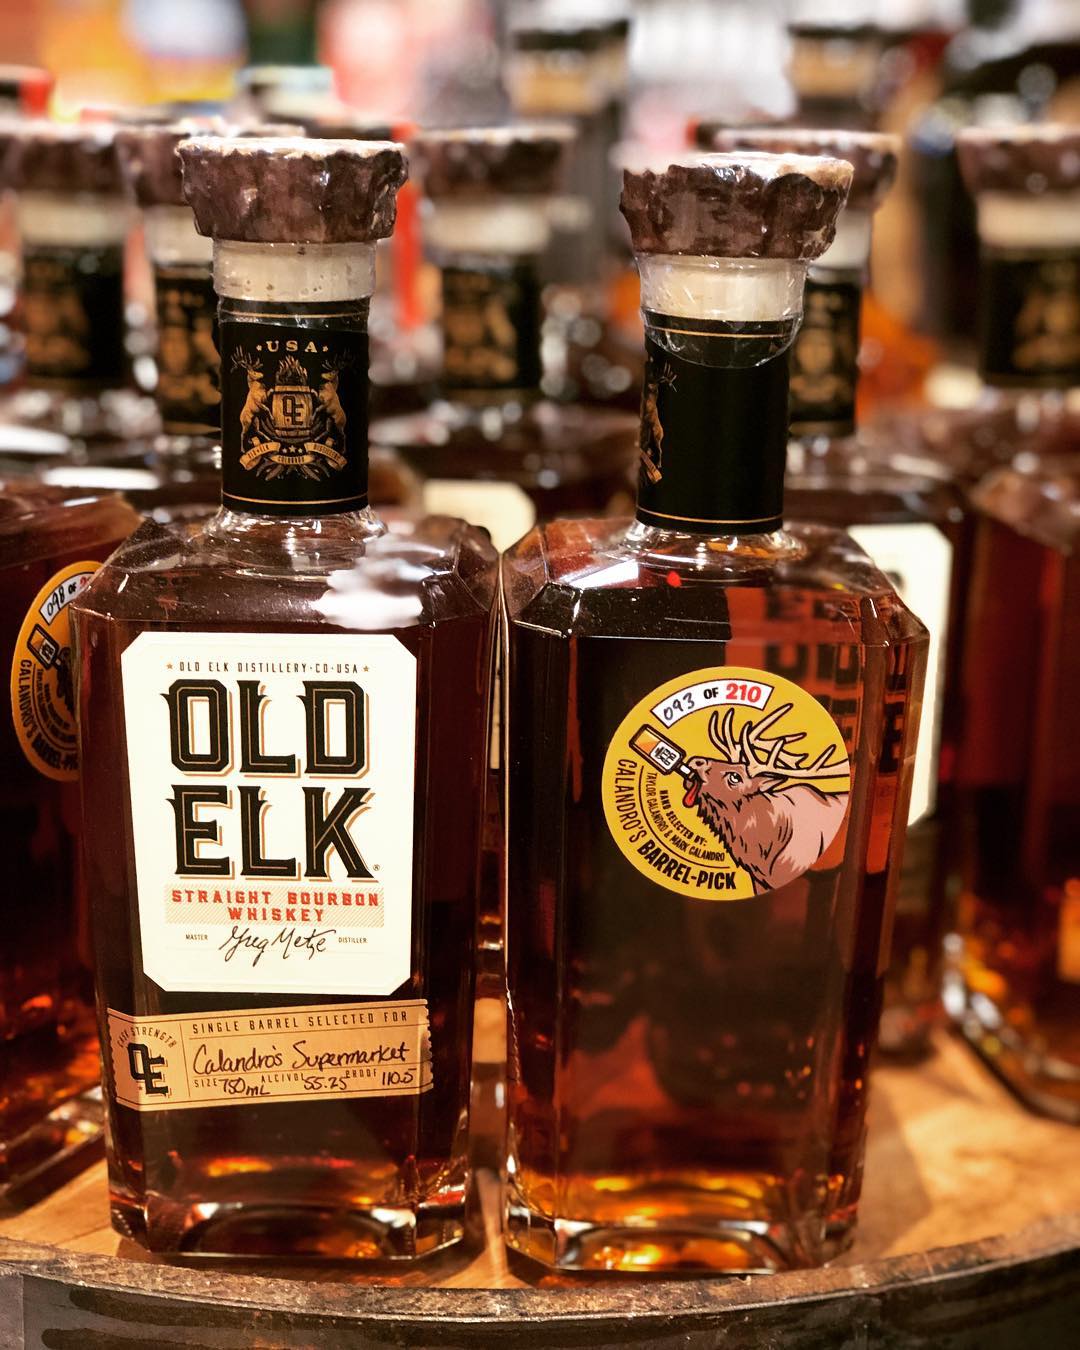 THIS JUST IN! The first barrel pick of @oldelkbourbon in the state of Louisiana at…